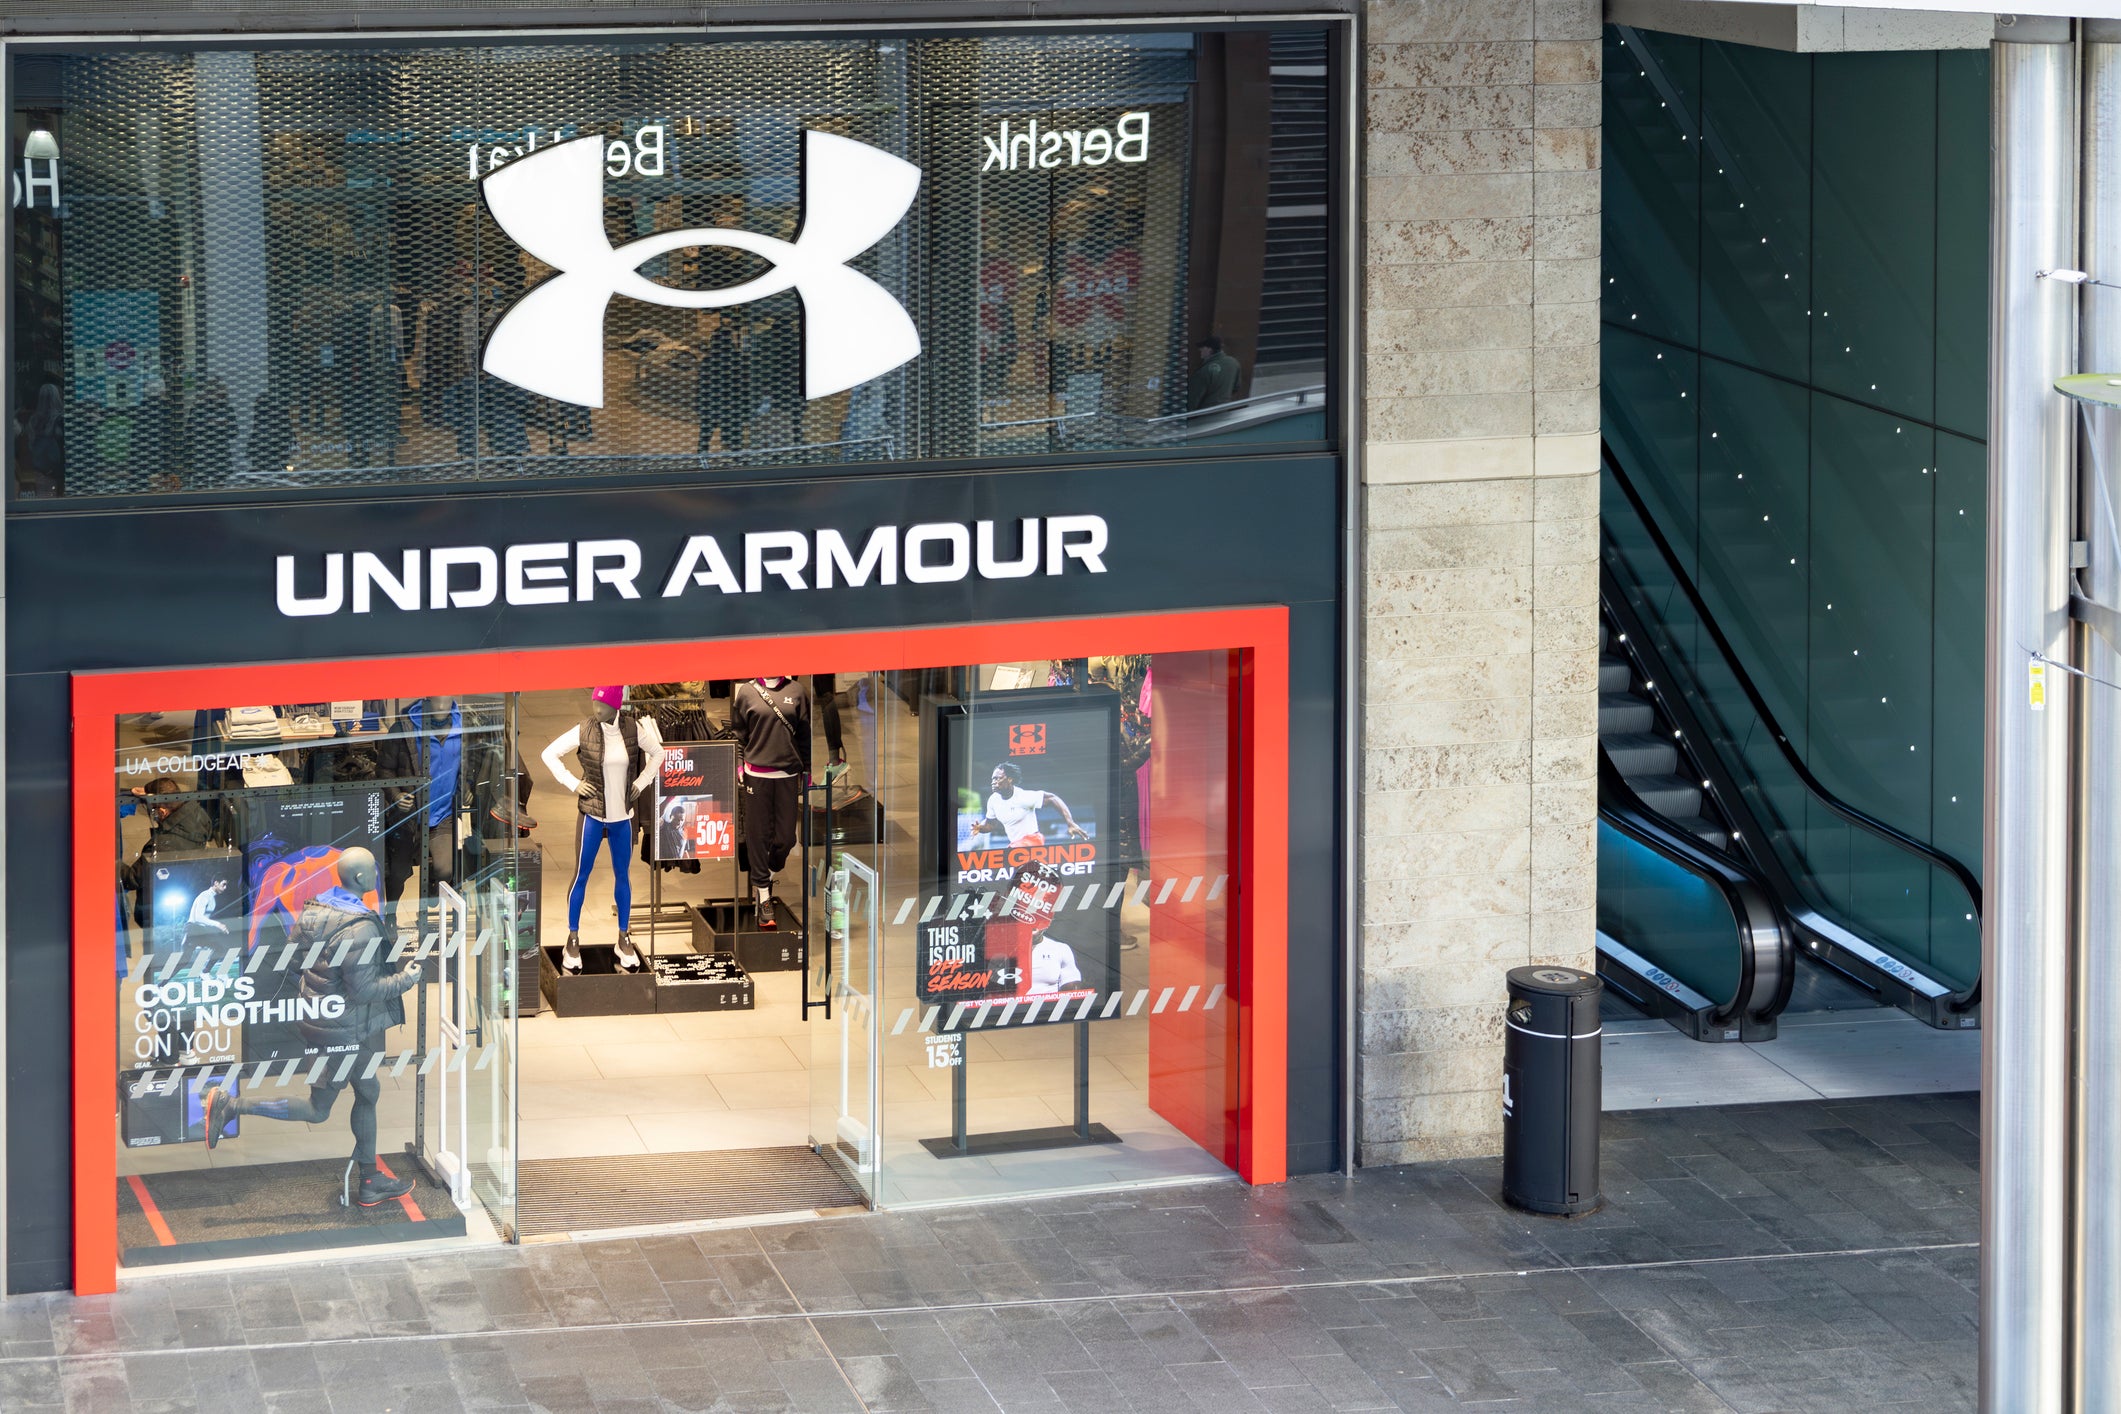 Sportswear company Under Armour announced plans to layoff workers.